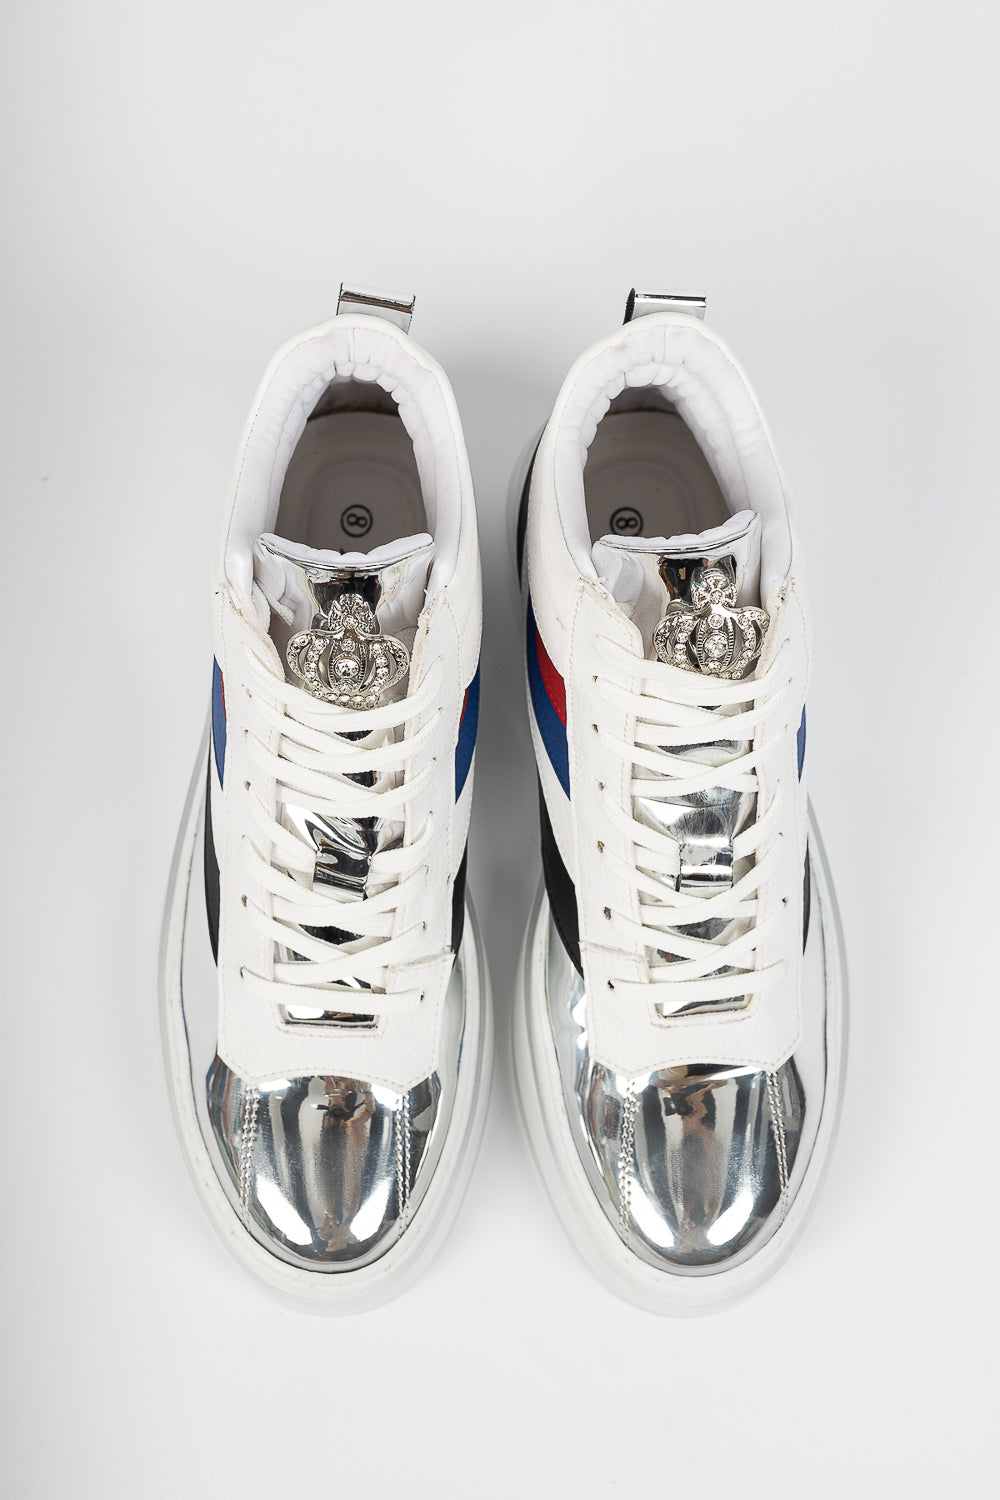 Majesty Silver White - Swagg Splash Sneakers